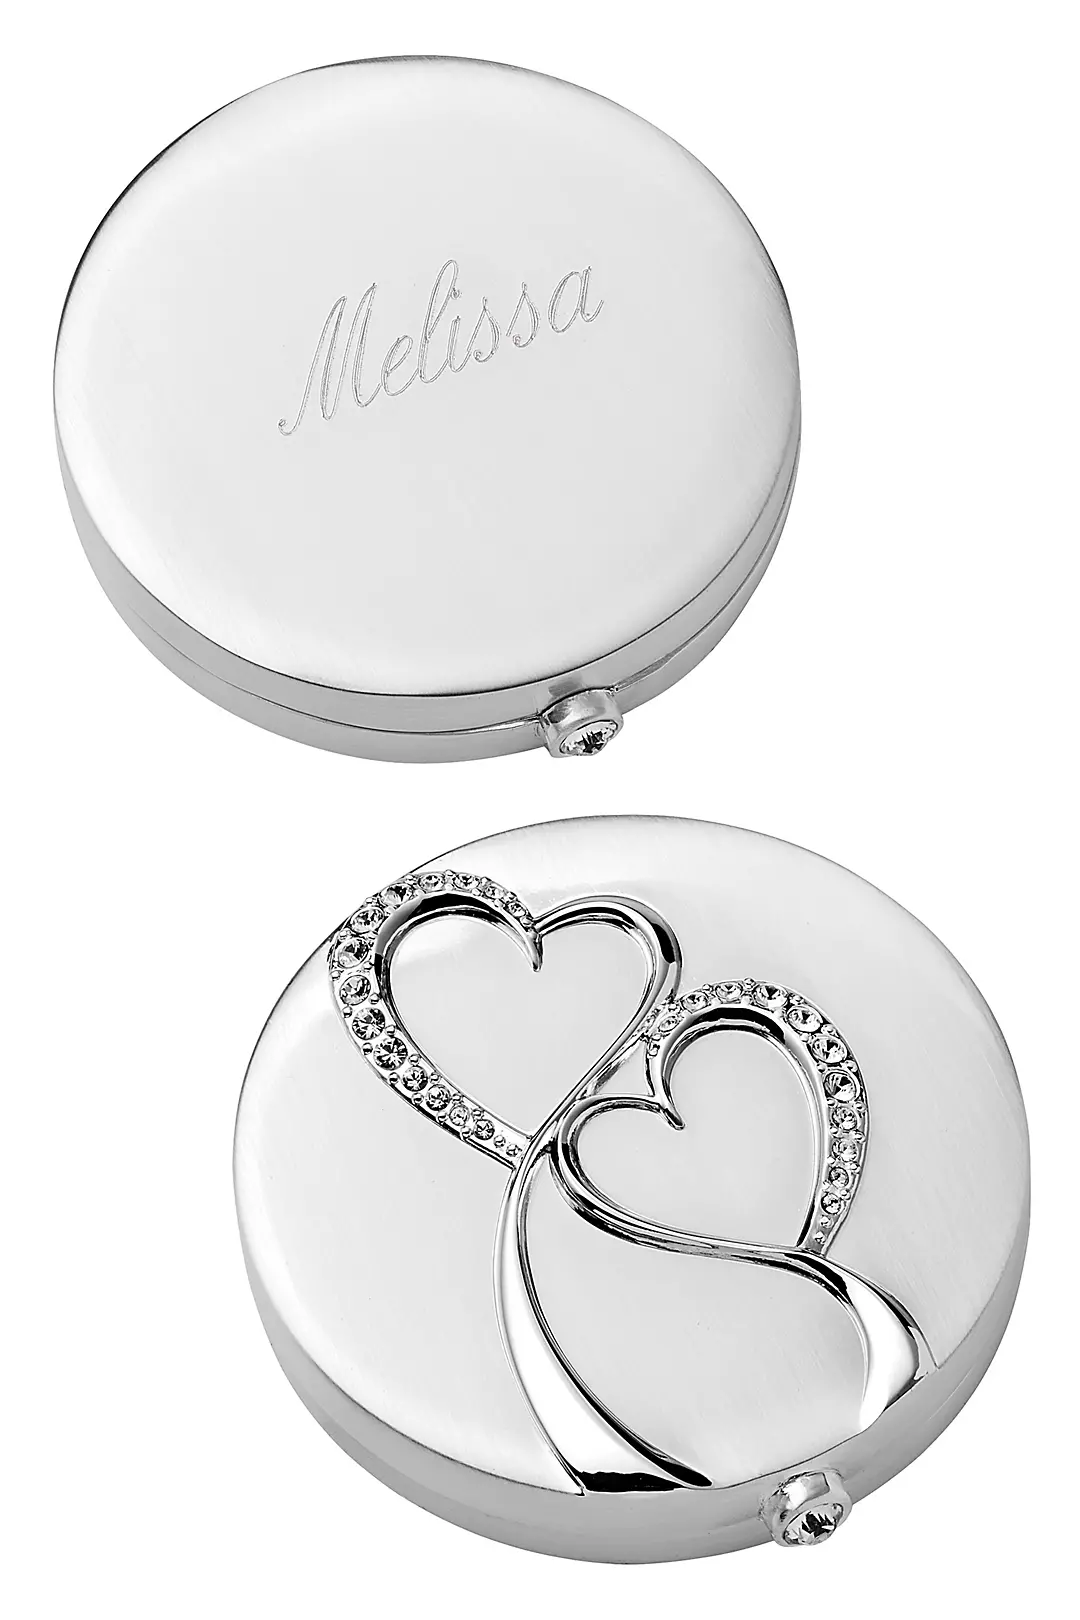 Personalized Silver Twin Hearts Compact Image